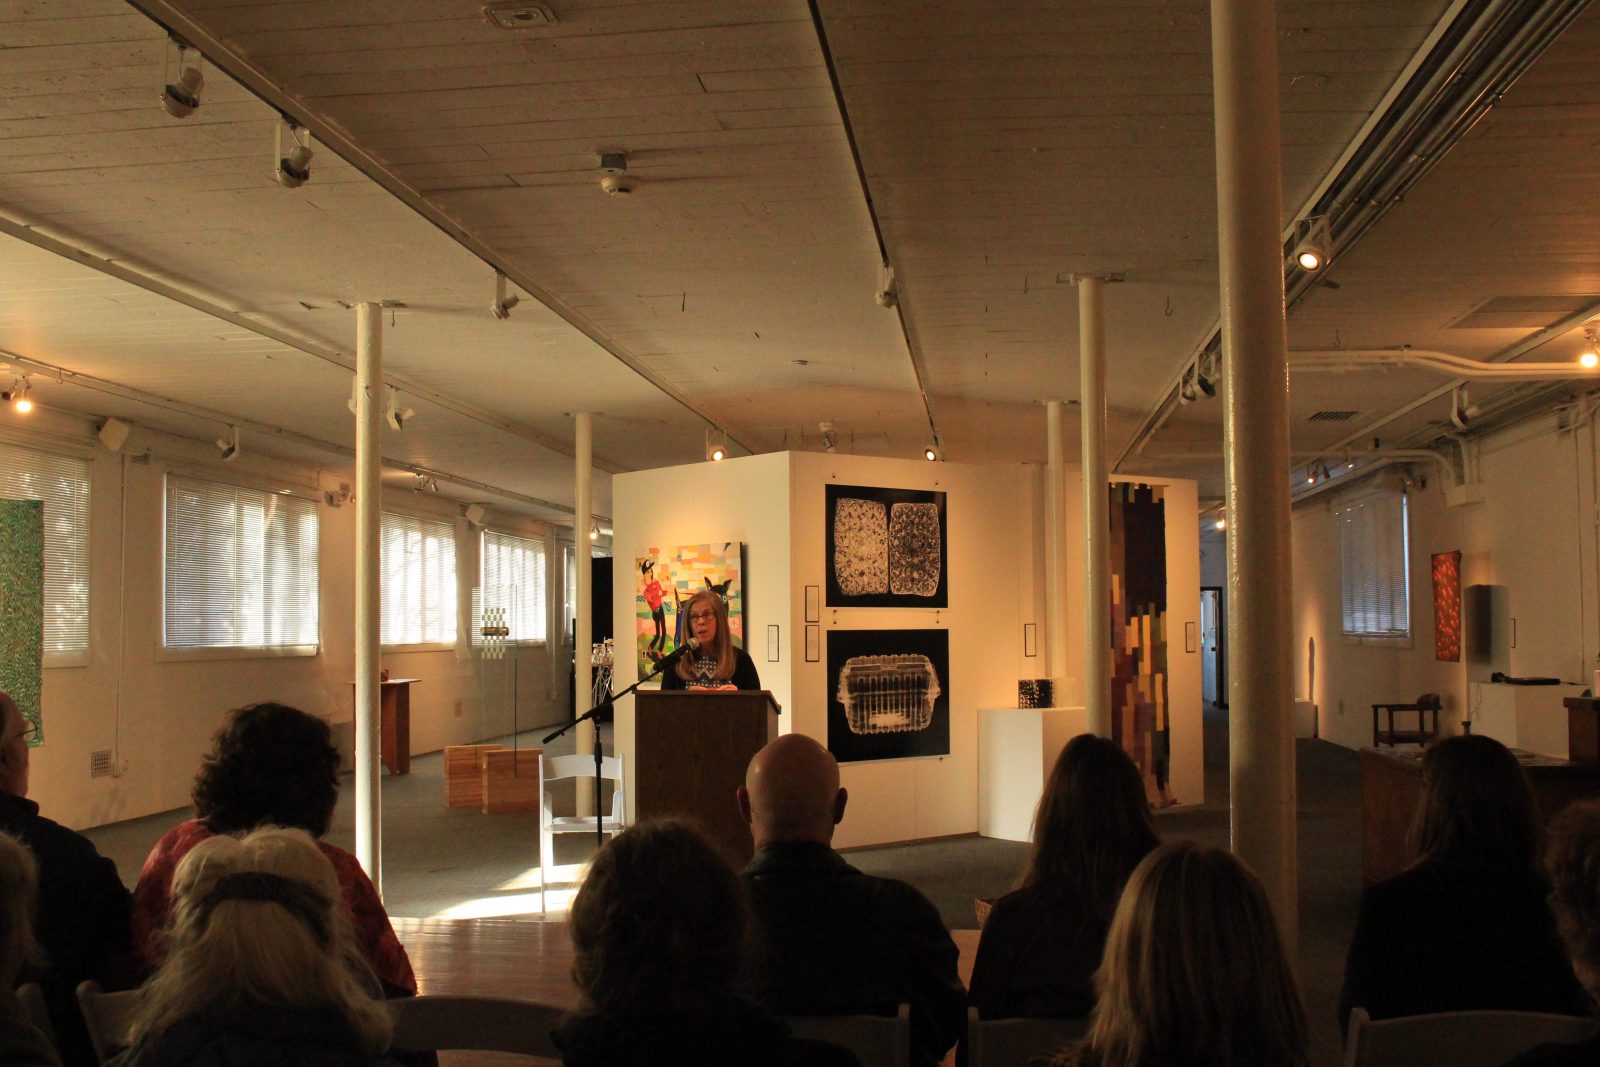 PHOTOS The Dairy Barn Arts Center Hosts First Spoken and